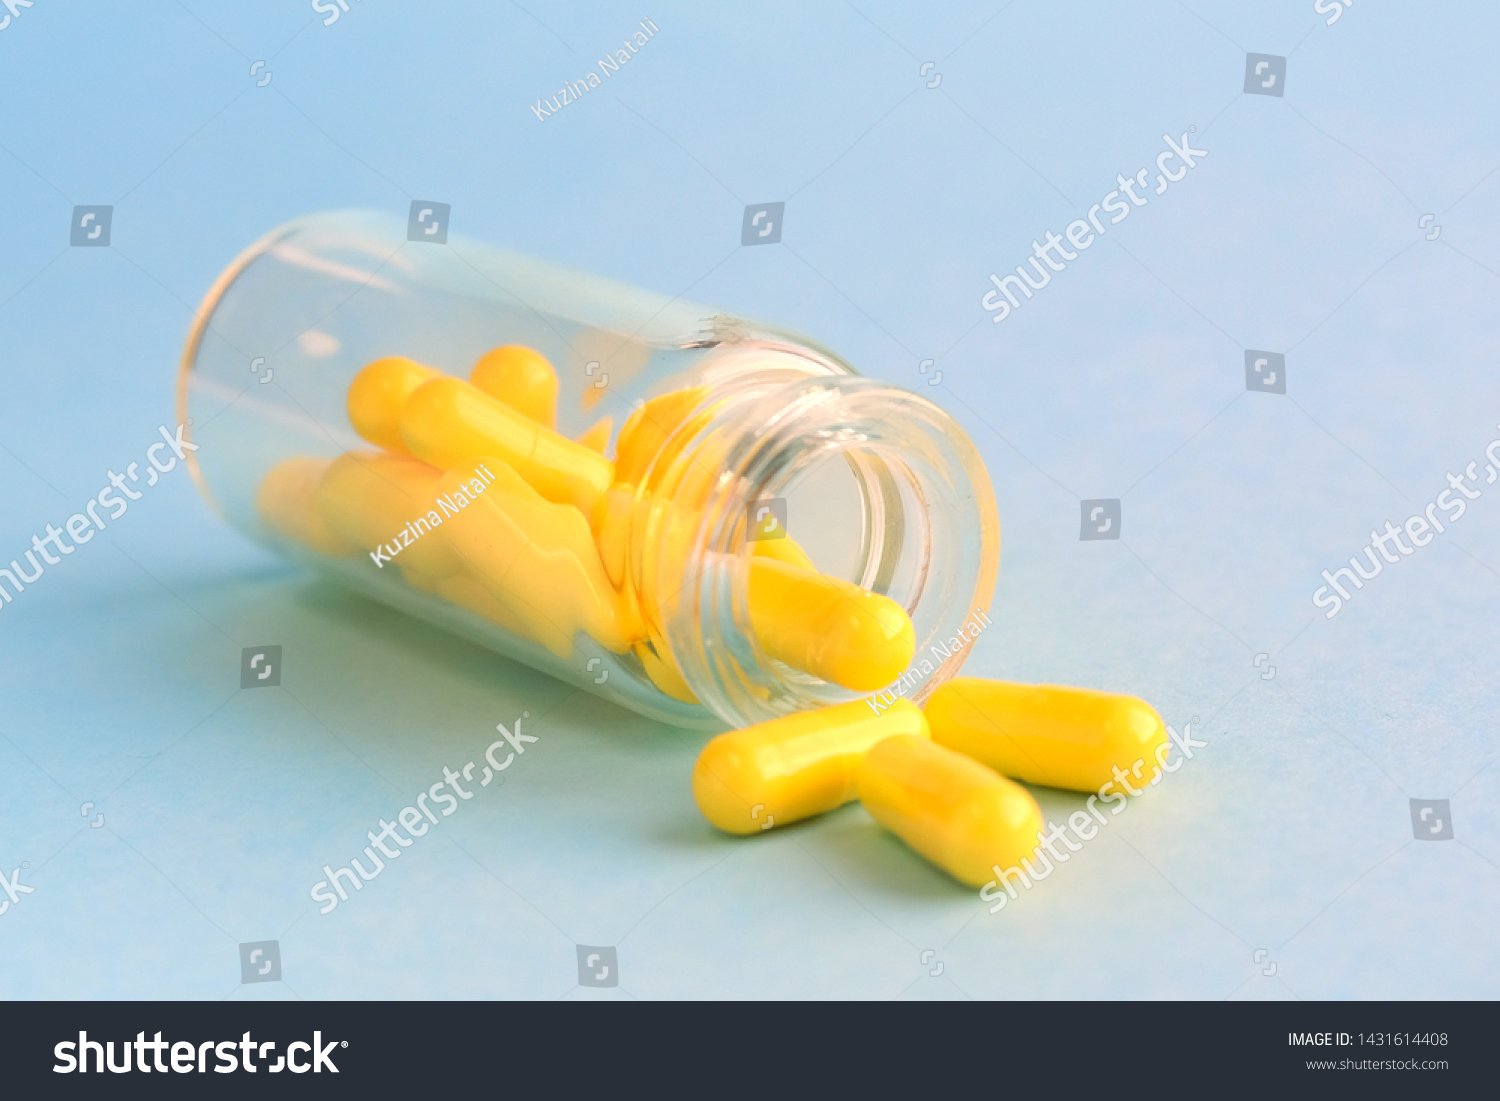 Download Yellow Capsules Glass Bottle On Blue Stock Photo Edit Now 1431614408 PSD Mockup Templates